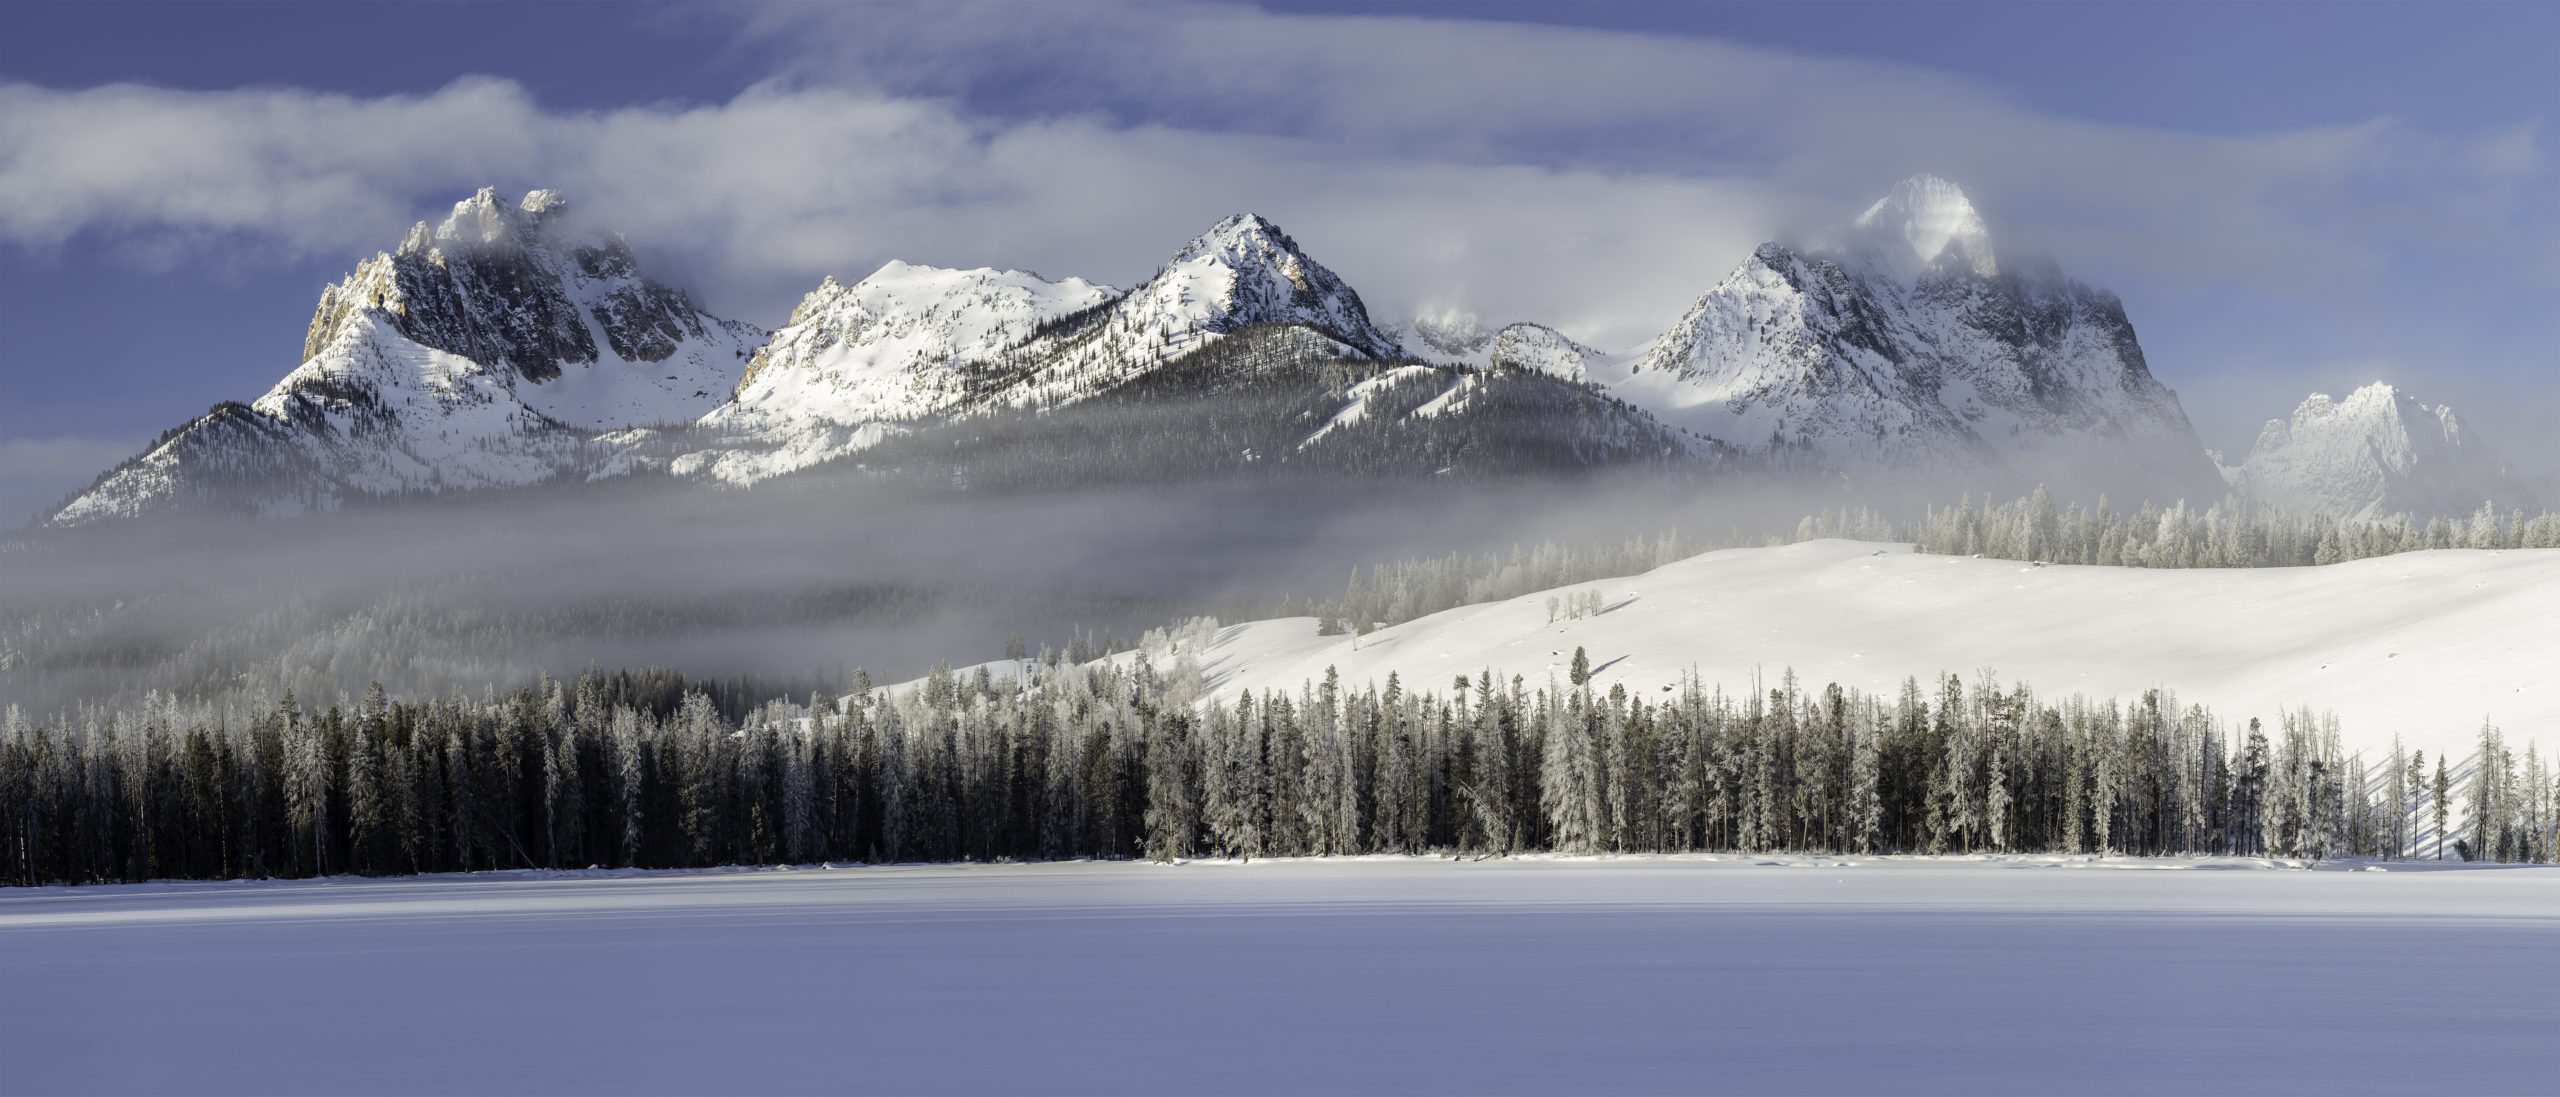 Winter activities in the Sawtooths